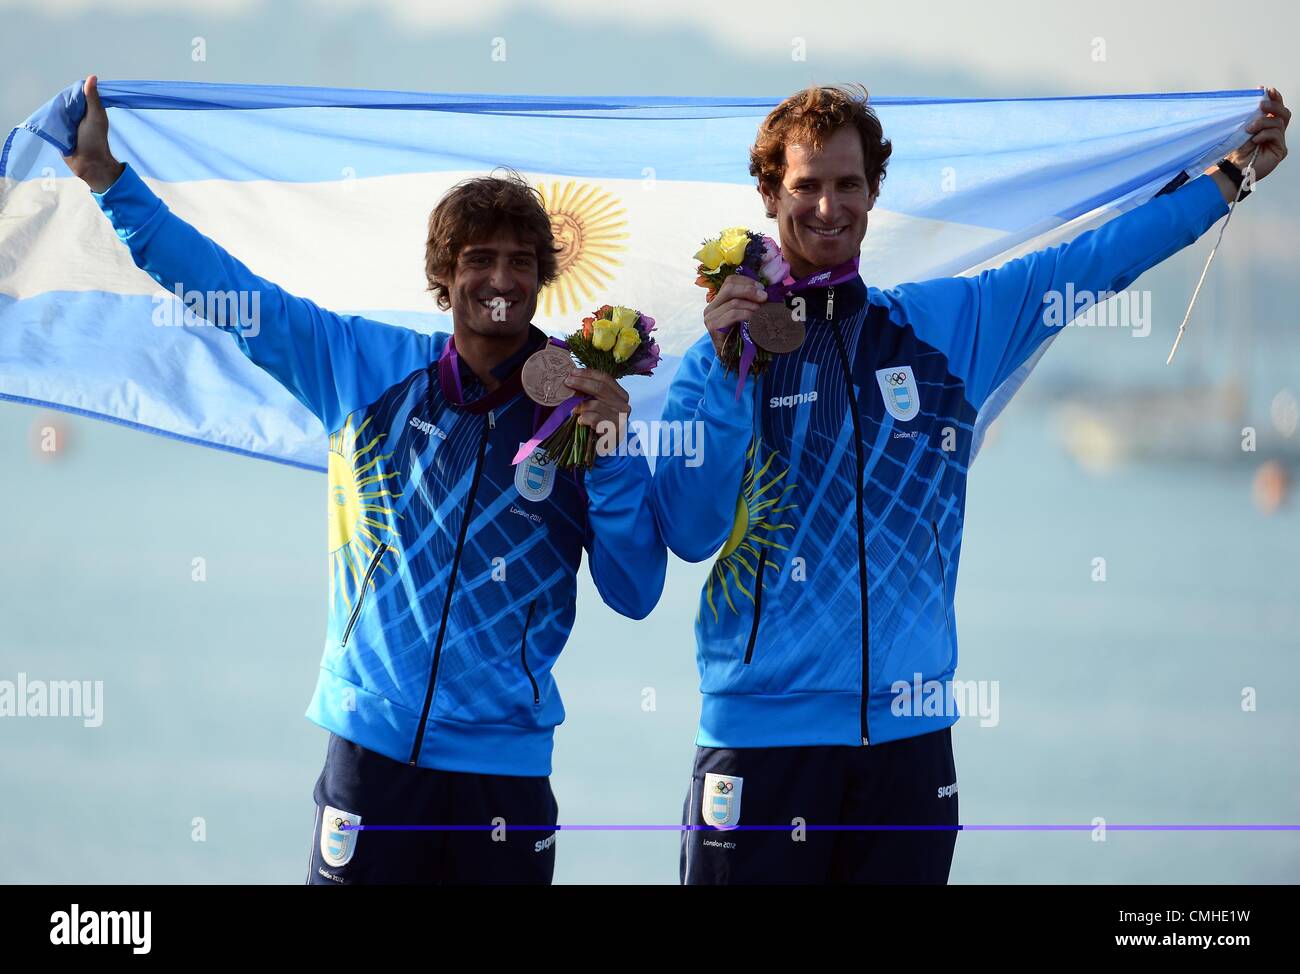 10th Aug 2012. London 2012 Olympics, Sailing at the Weymouth & Portland Venue, Dorset, Britain, UK.  August 10th, 2012 Men's 470 medal race bronze medal winners, Lucas Calabrese and Juan de la Fuente of Argentina PICTURE: DORSET MEDIA SERVICE Stock Photo